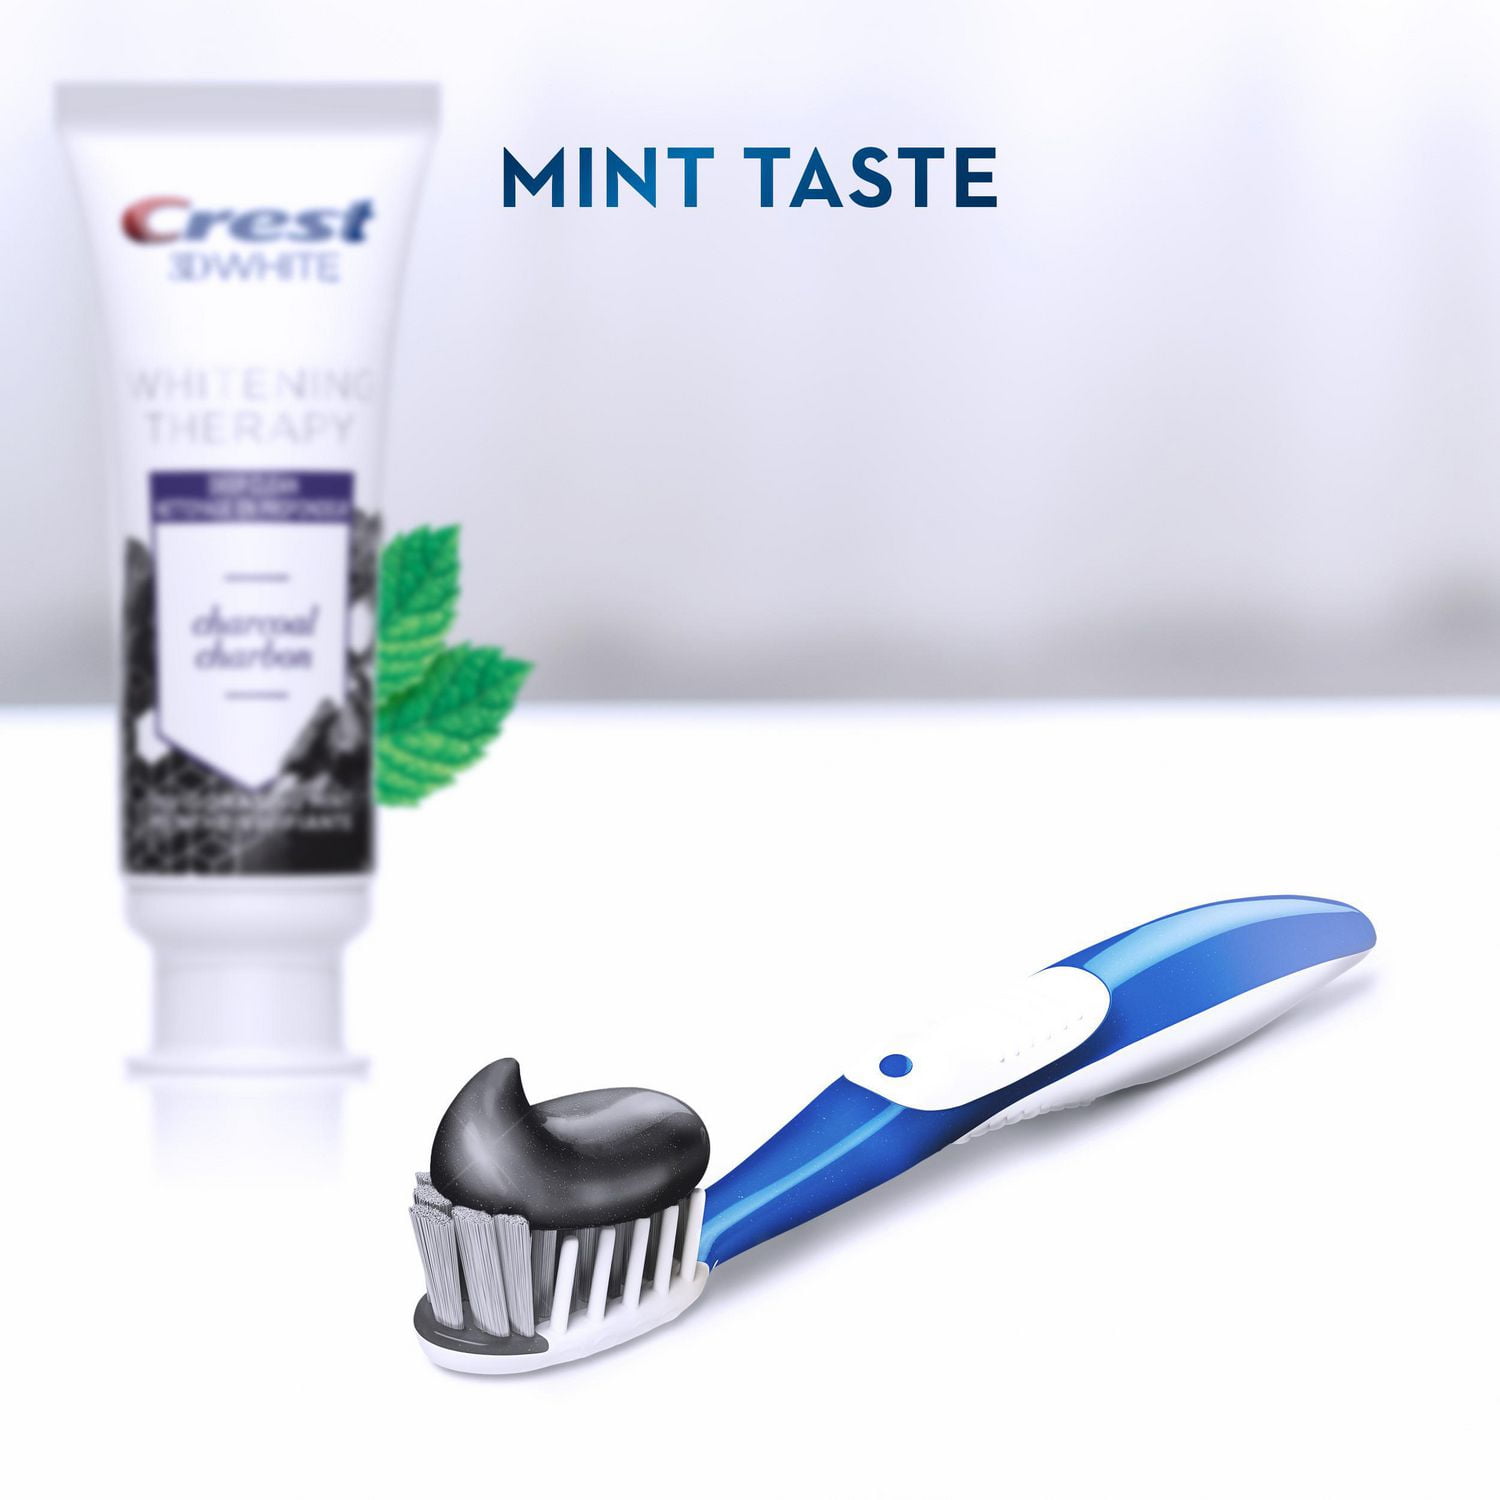 3D White Whitening Therapy Toothpaste - Charcoal